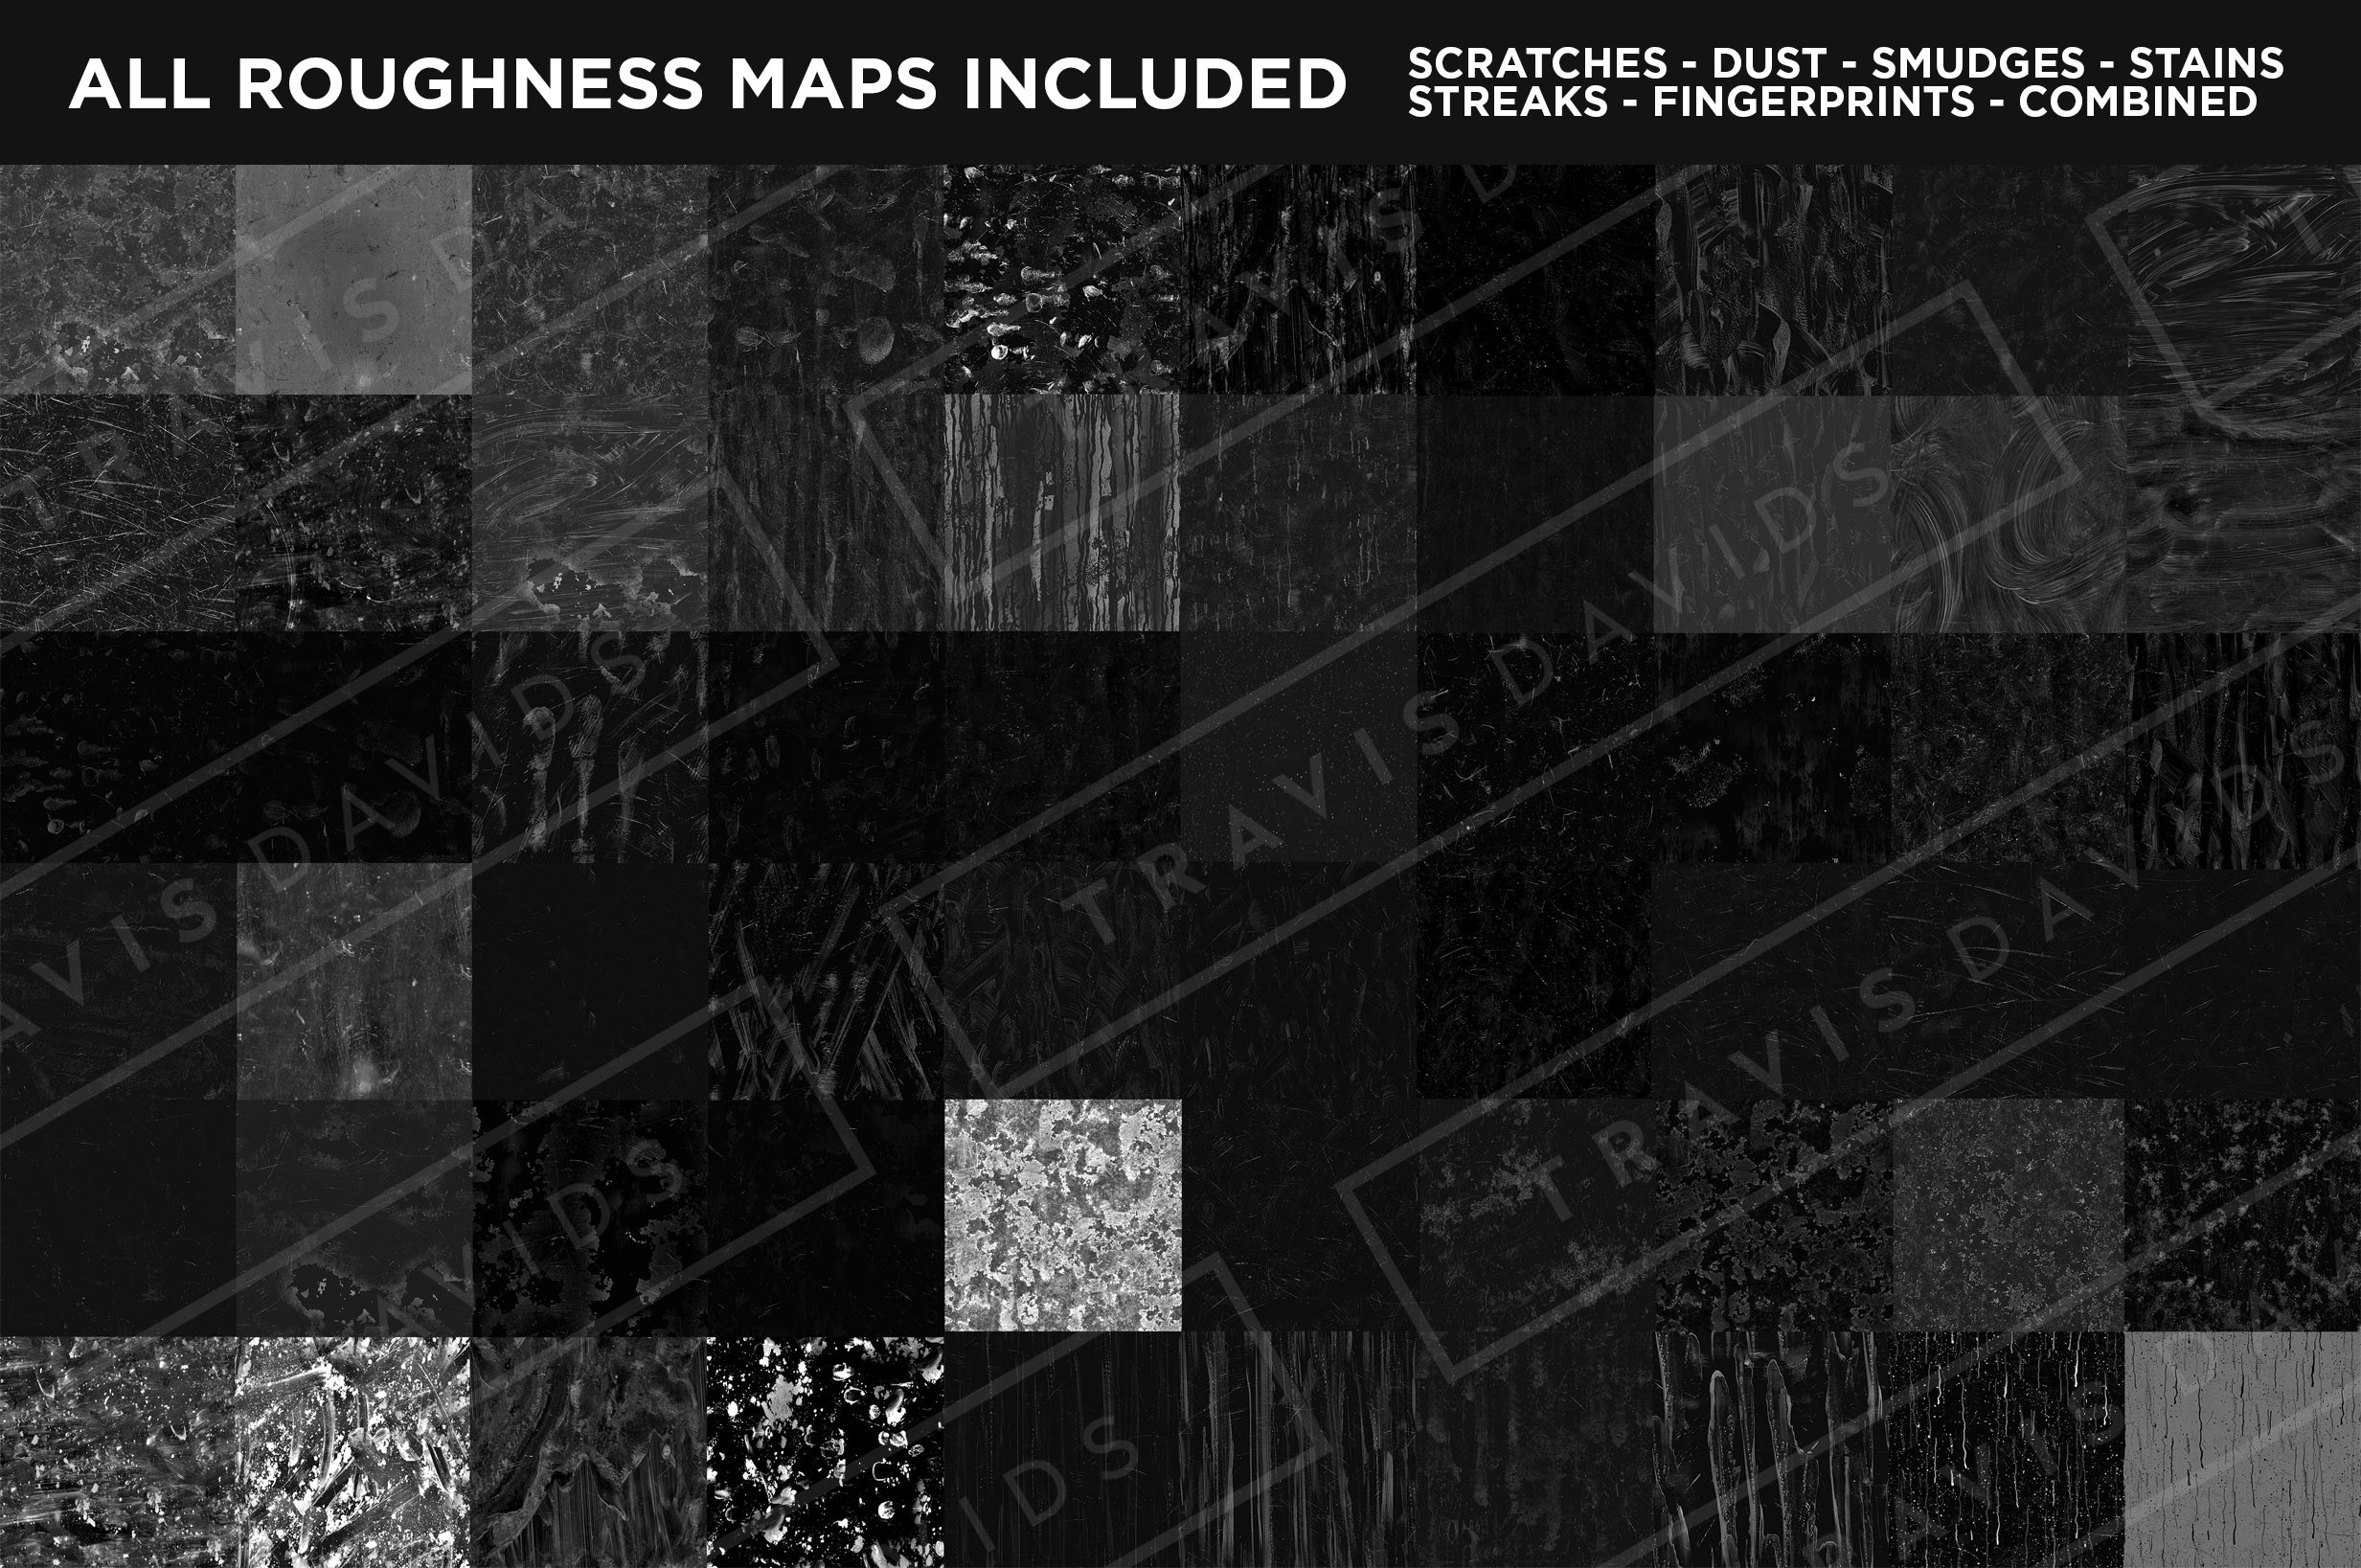 All roughness maps included. 7 Categories. Scratches, Dust, Smudges, Stains, Streaks, Fingerprints and Combined. 